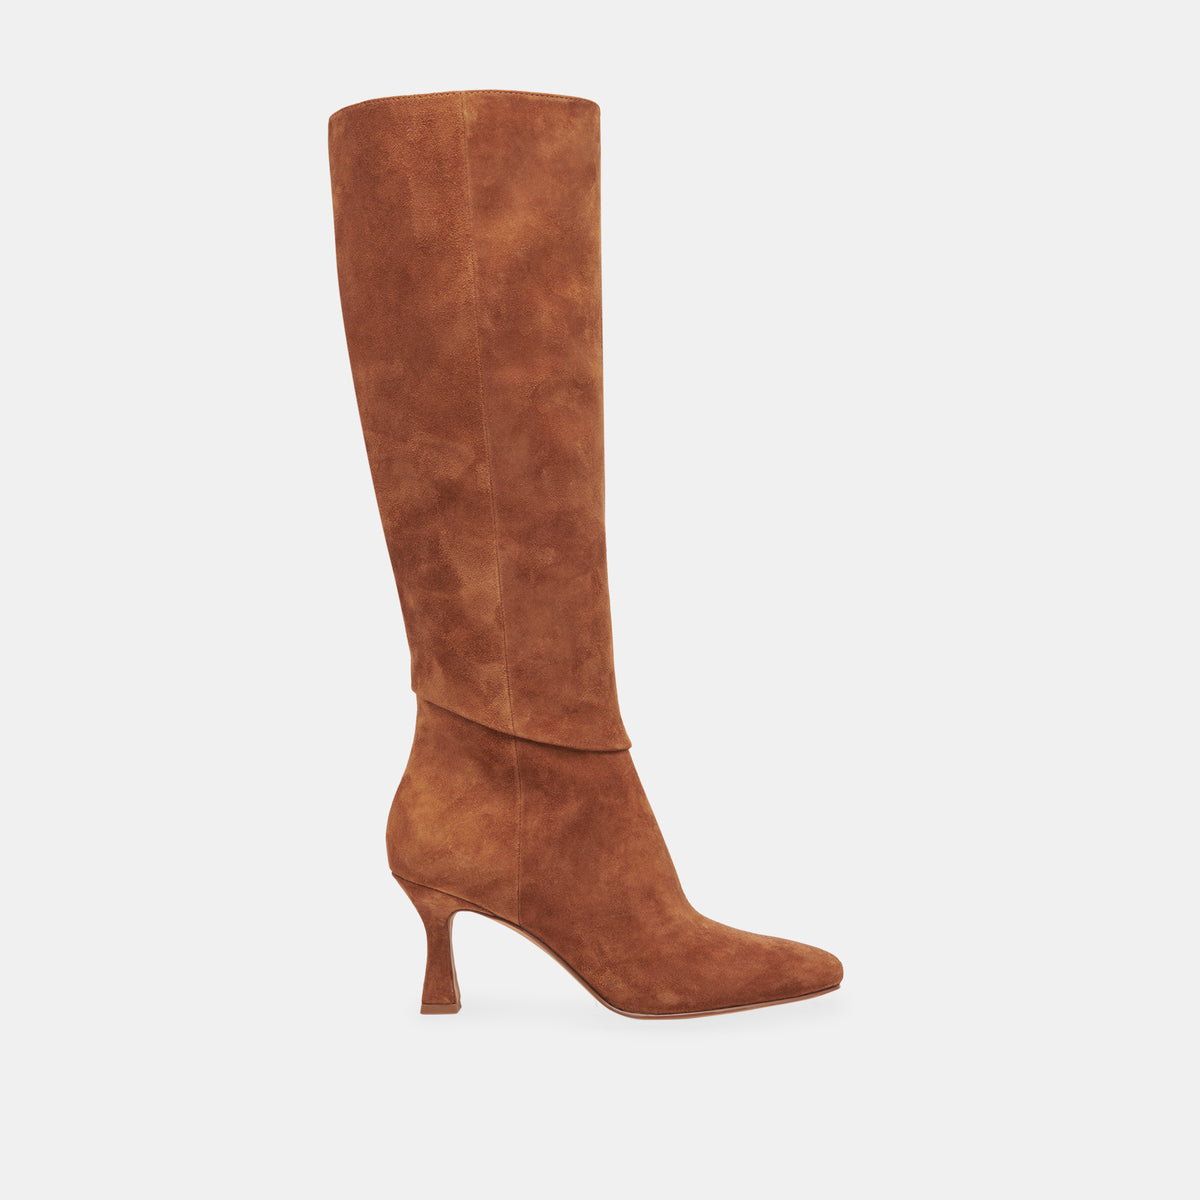 GYRA BOOTS BROWN SUEDE – Dolce Vita